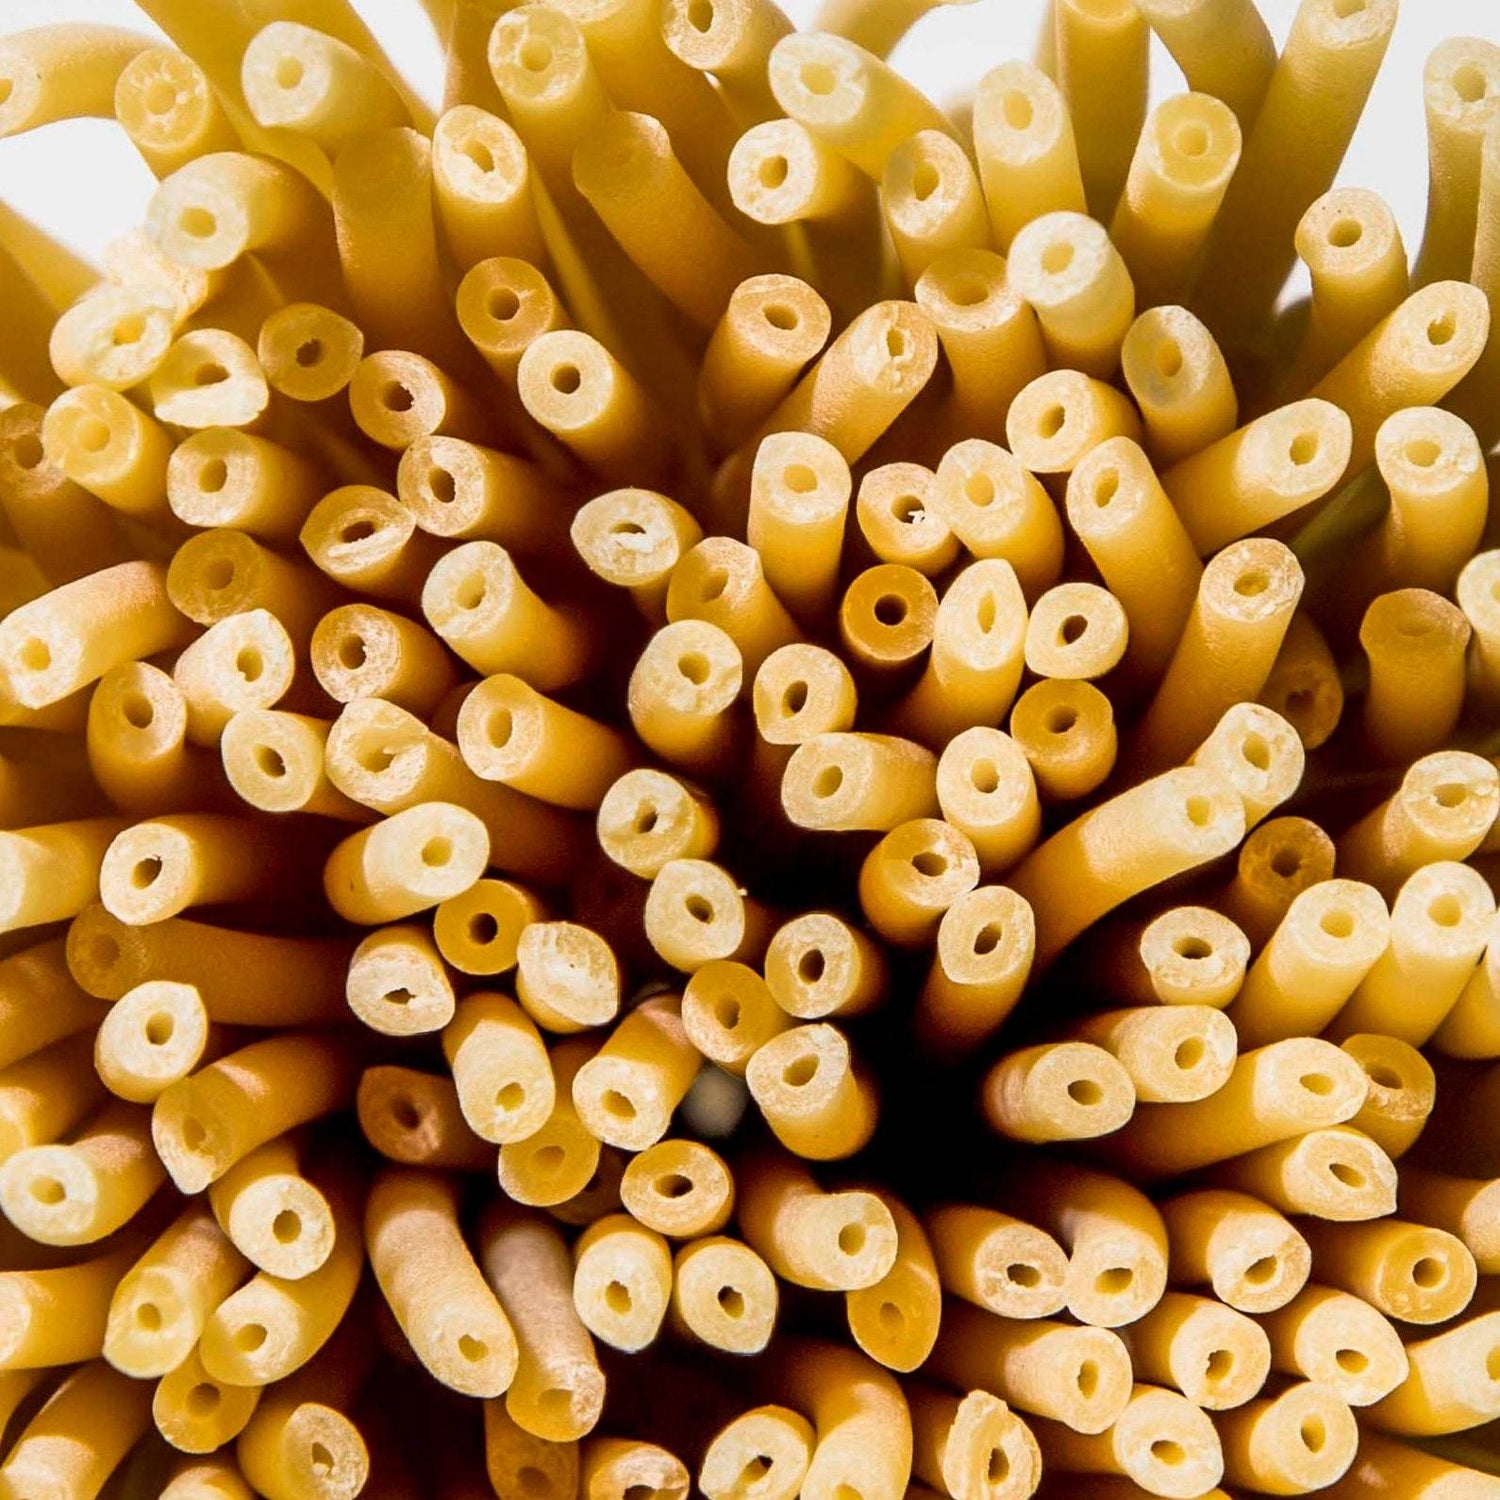 Close up, overhead view of hundreds of pieces of bucatini pasta. From this angle the yellow pasta resembles long tubes or drinking straws.